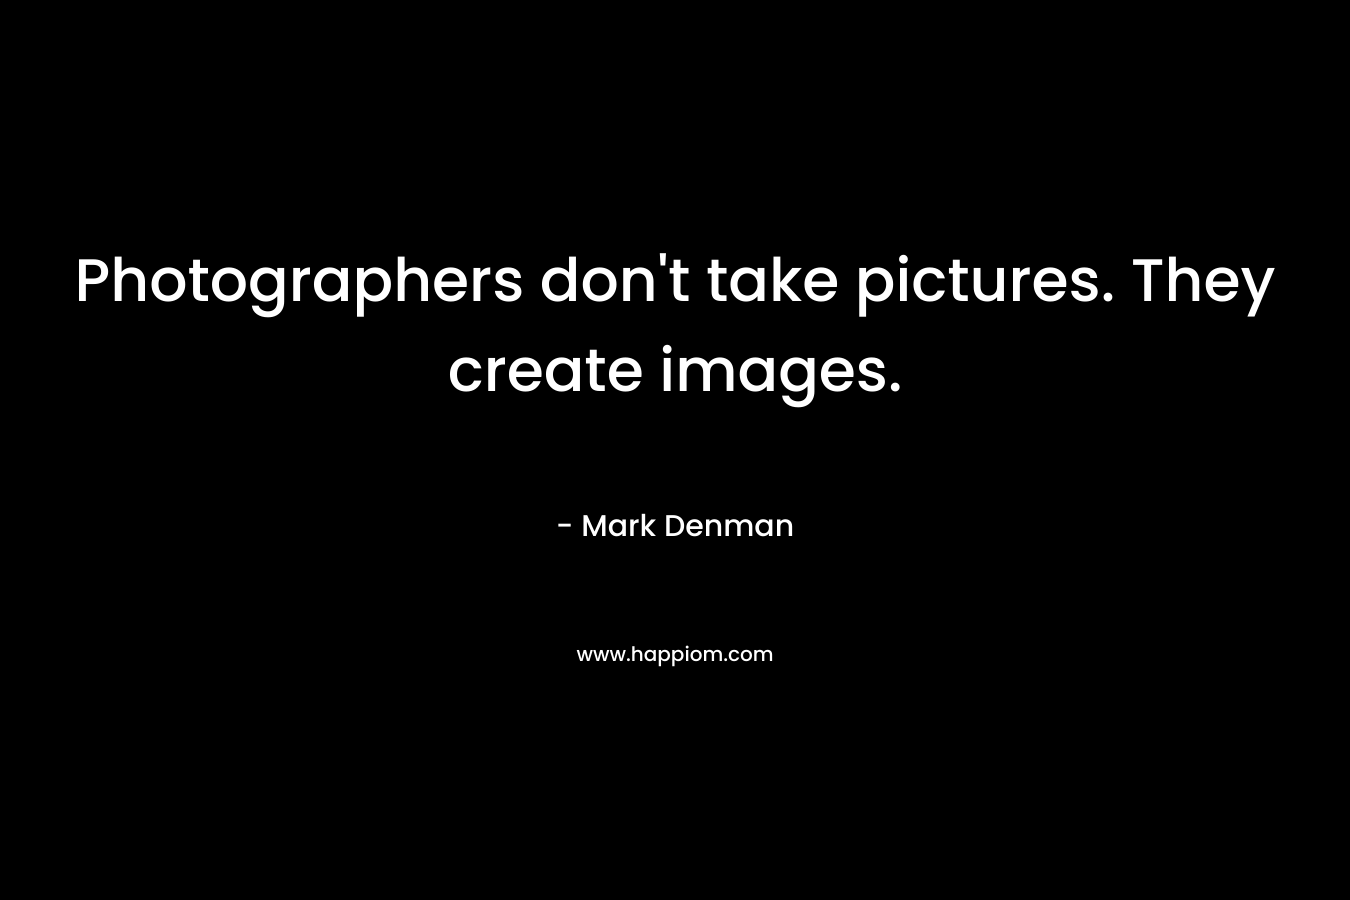 Photographers don’t take pictures. They create images. – Mark Denman